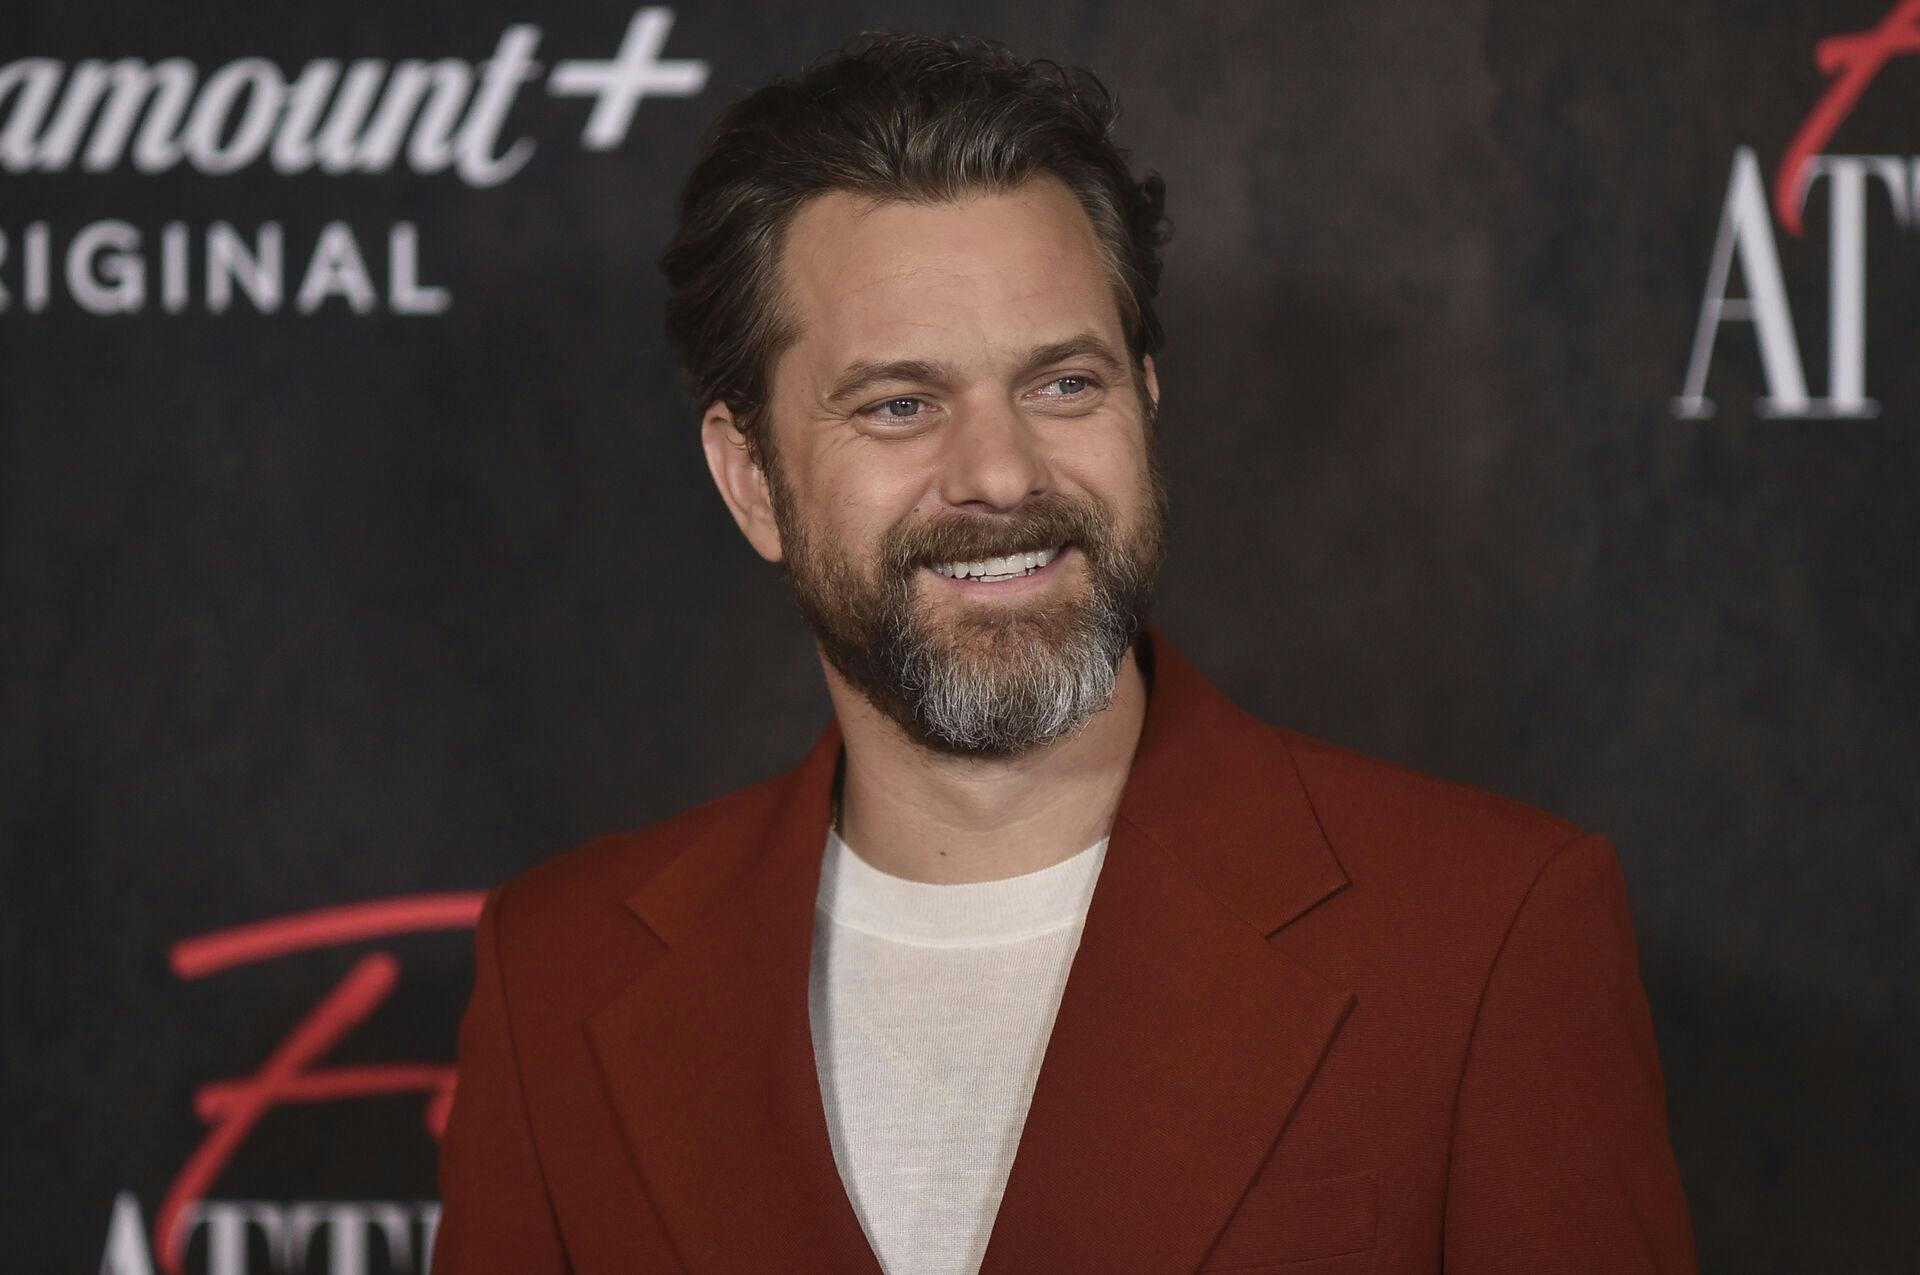 Joshua Jackson arrives at the premiere of "Fatal Attraction" on Monday, April 24, 2023, at the Pacific Design Center in West Hollywood, Calif. (Photo by Richard Shotwell/Invision/AP)